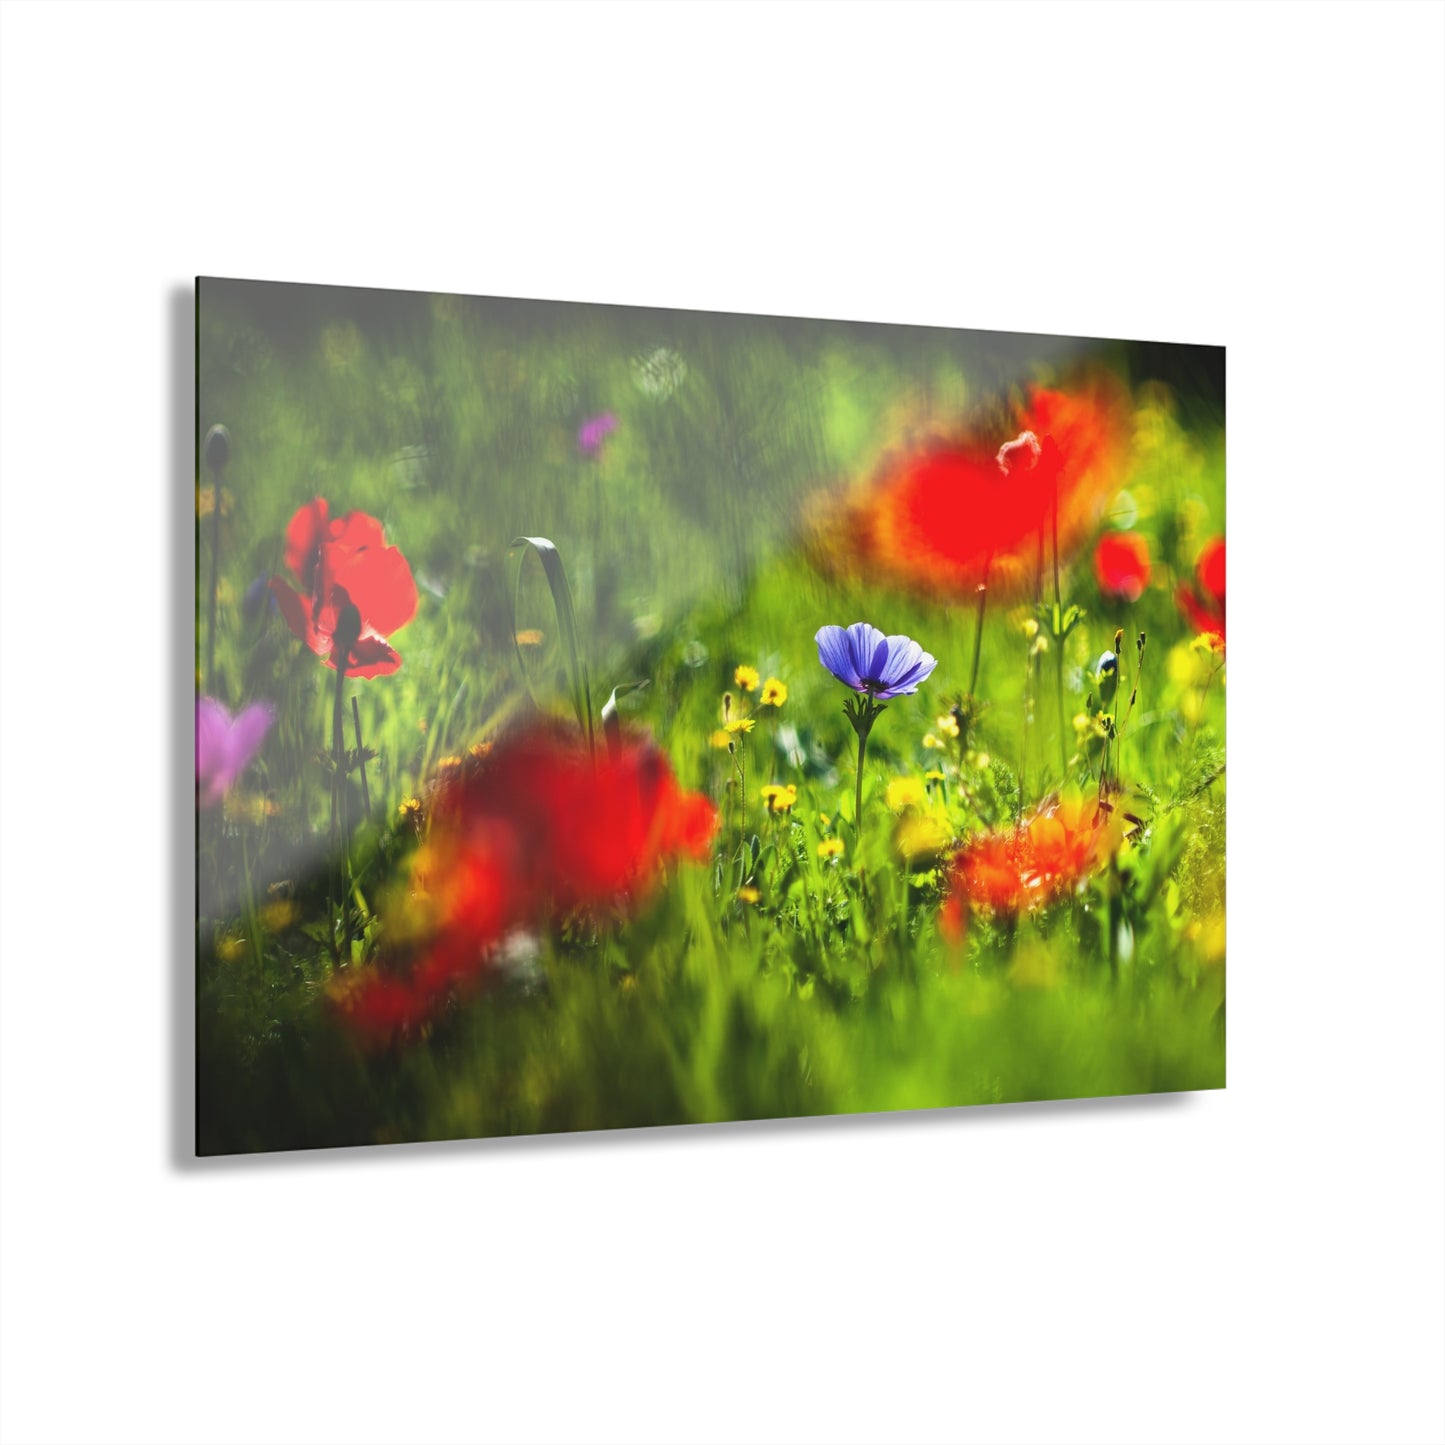 Elah Valley Wildflowers Yehoshua Halevi Photograph - Glossy Acrylic Print (French Cleat Hanging)